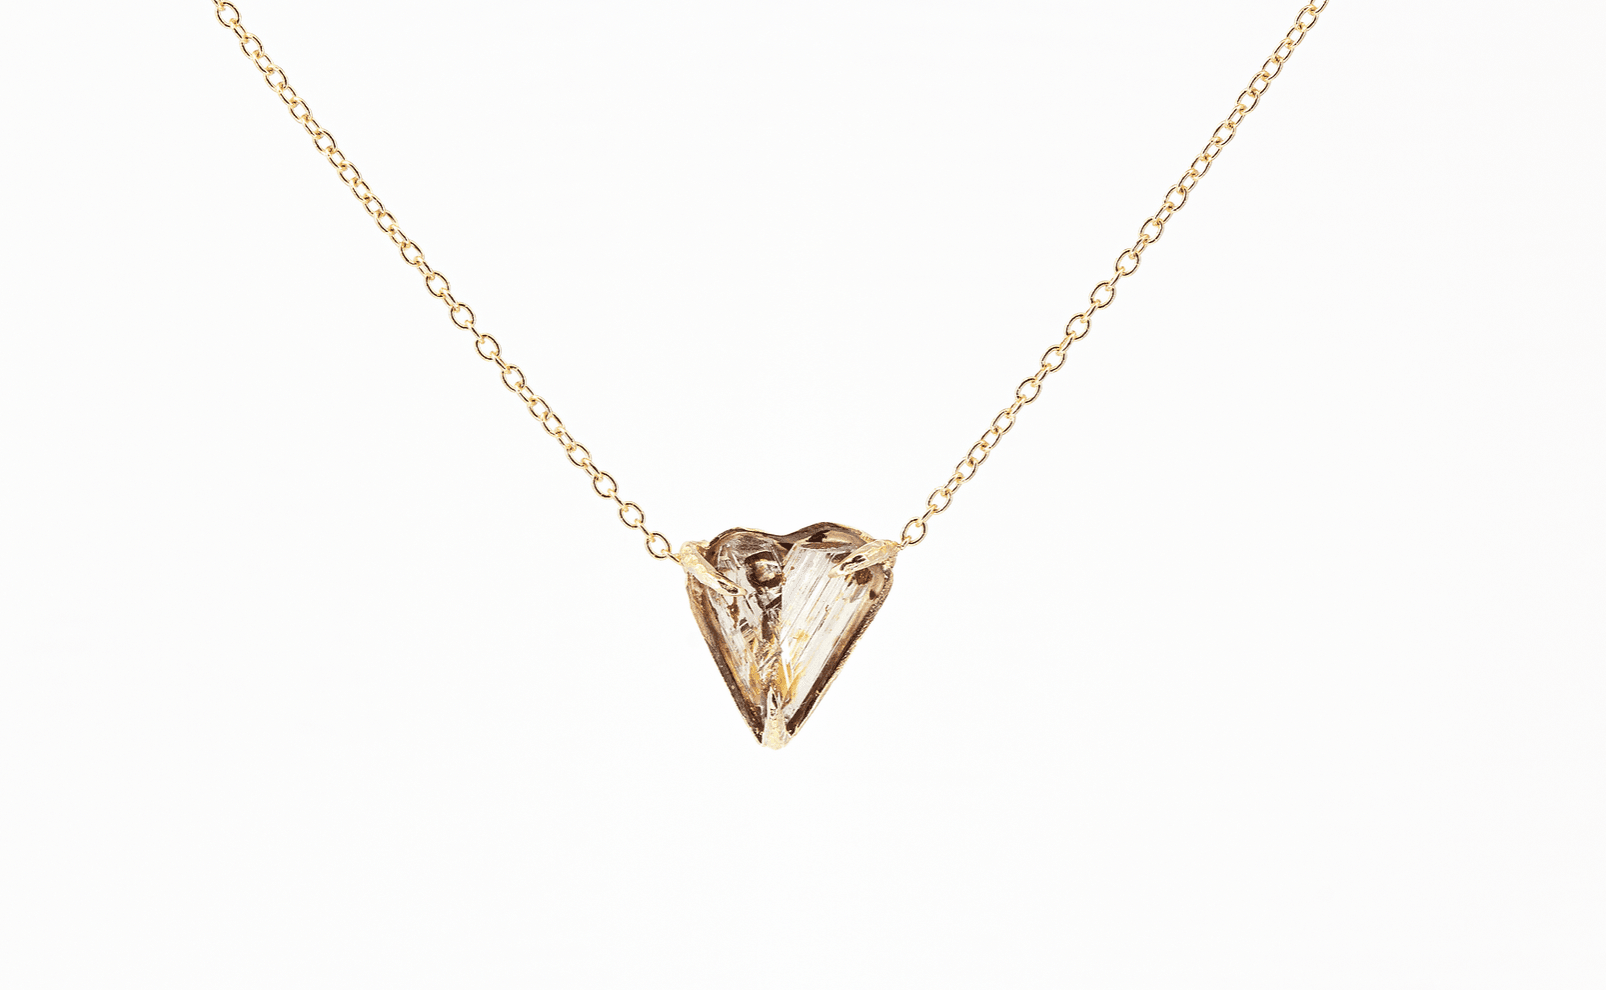 Diaspore Heart & 14k Yellow Gold Necklace from Leela Grace Jewelry - Haven